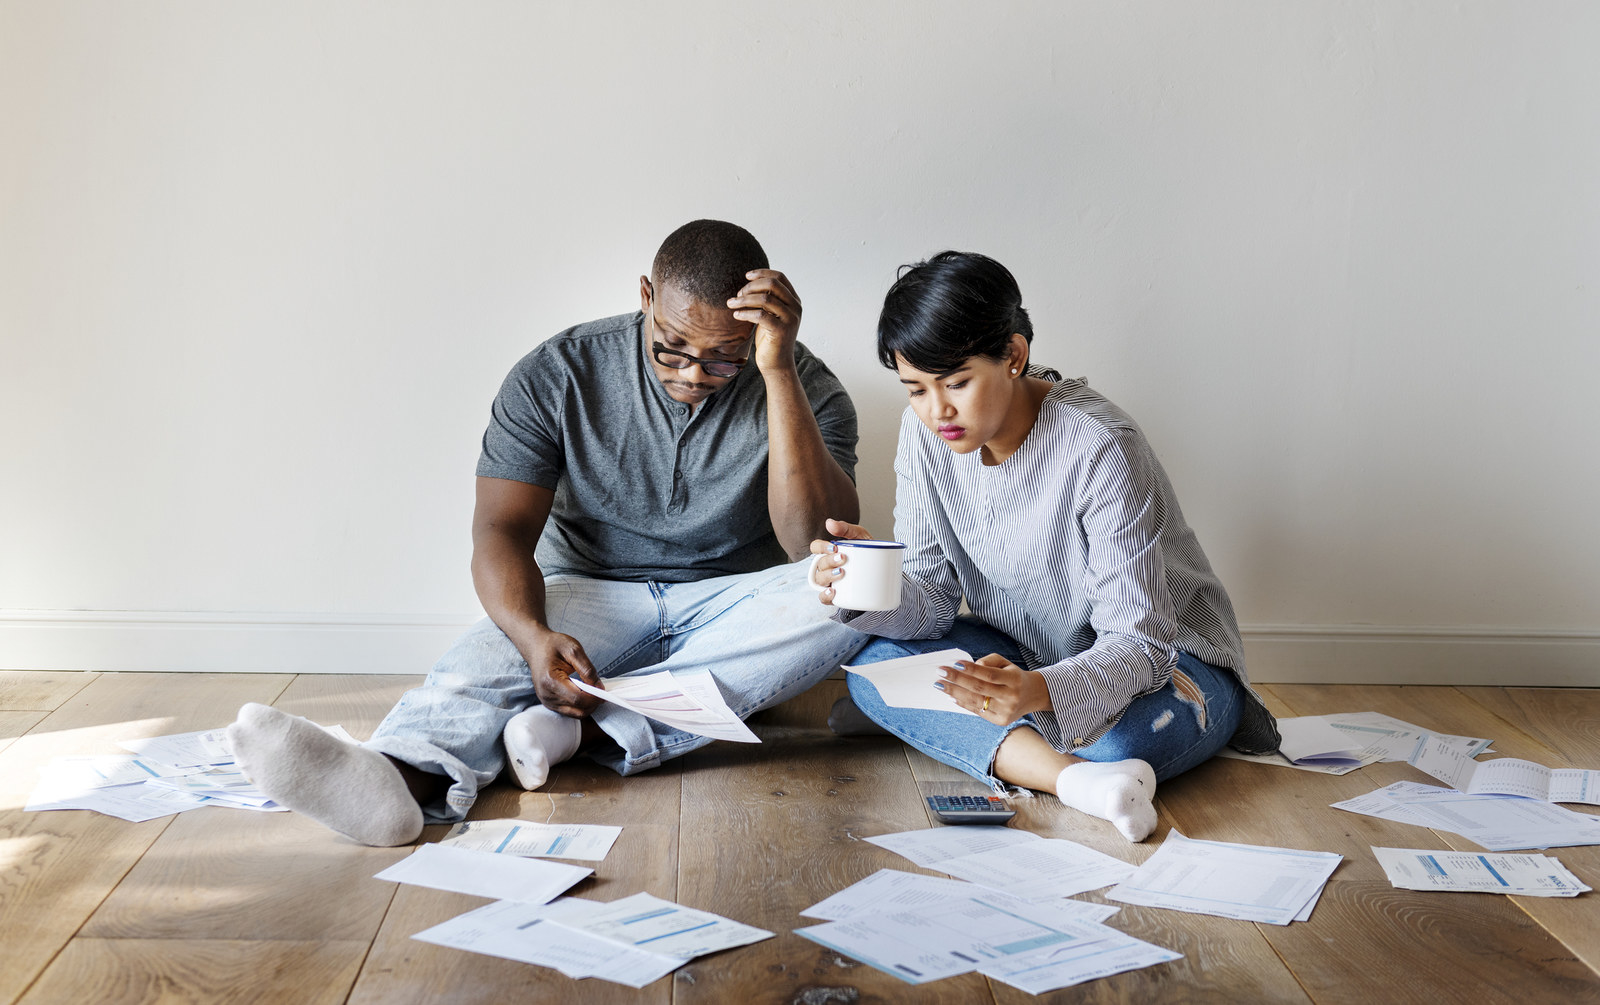 Confused-looking man and woman sitting on floor and sorting through papers